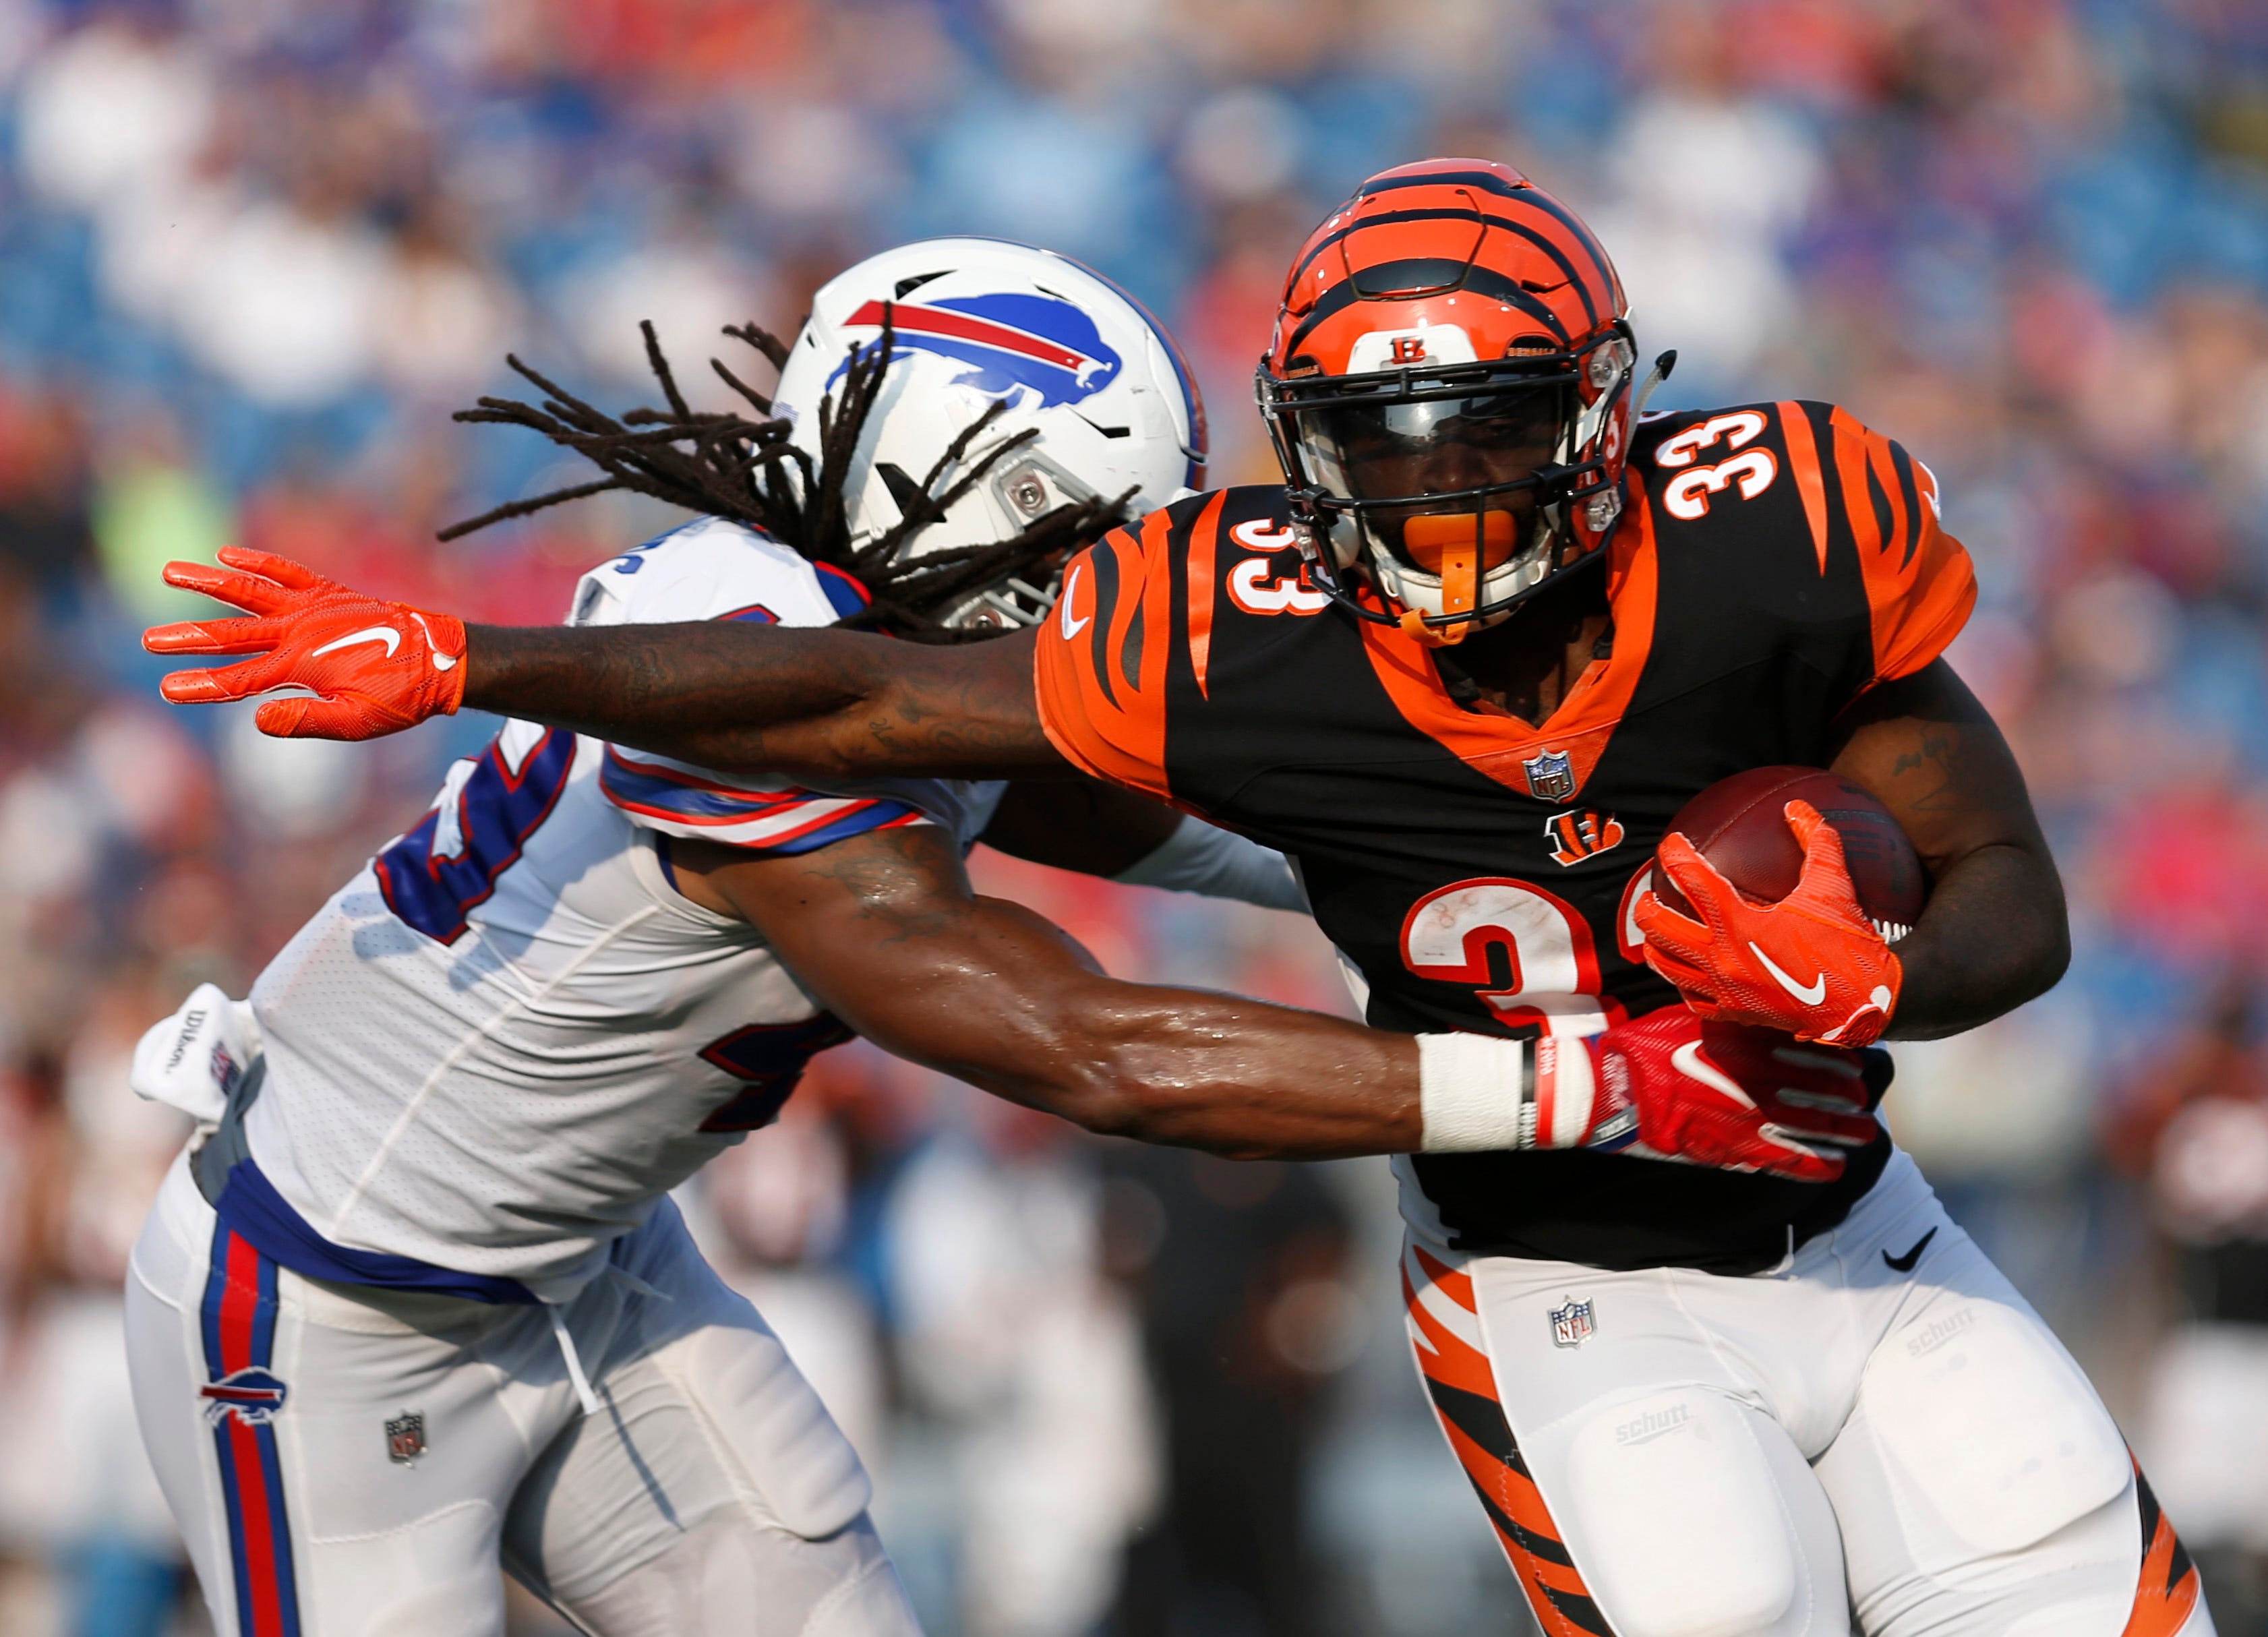 Buffalo Bills linebacker Tremaine Edmunds, left, tries to tackle Cincinnati Bengals running back Tra Carson as he runs the ball during the second half at New Era Field in Orchard Park, N.Y.